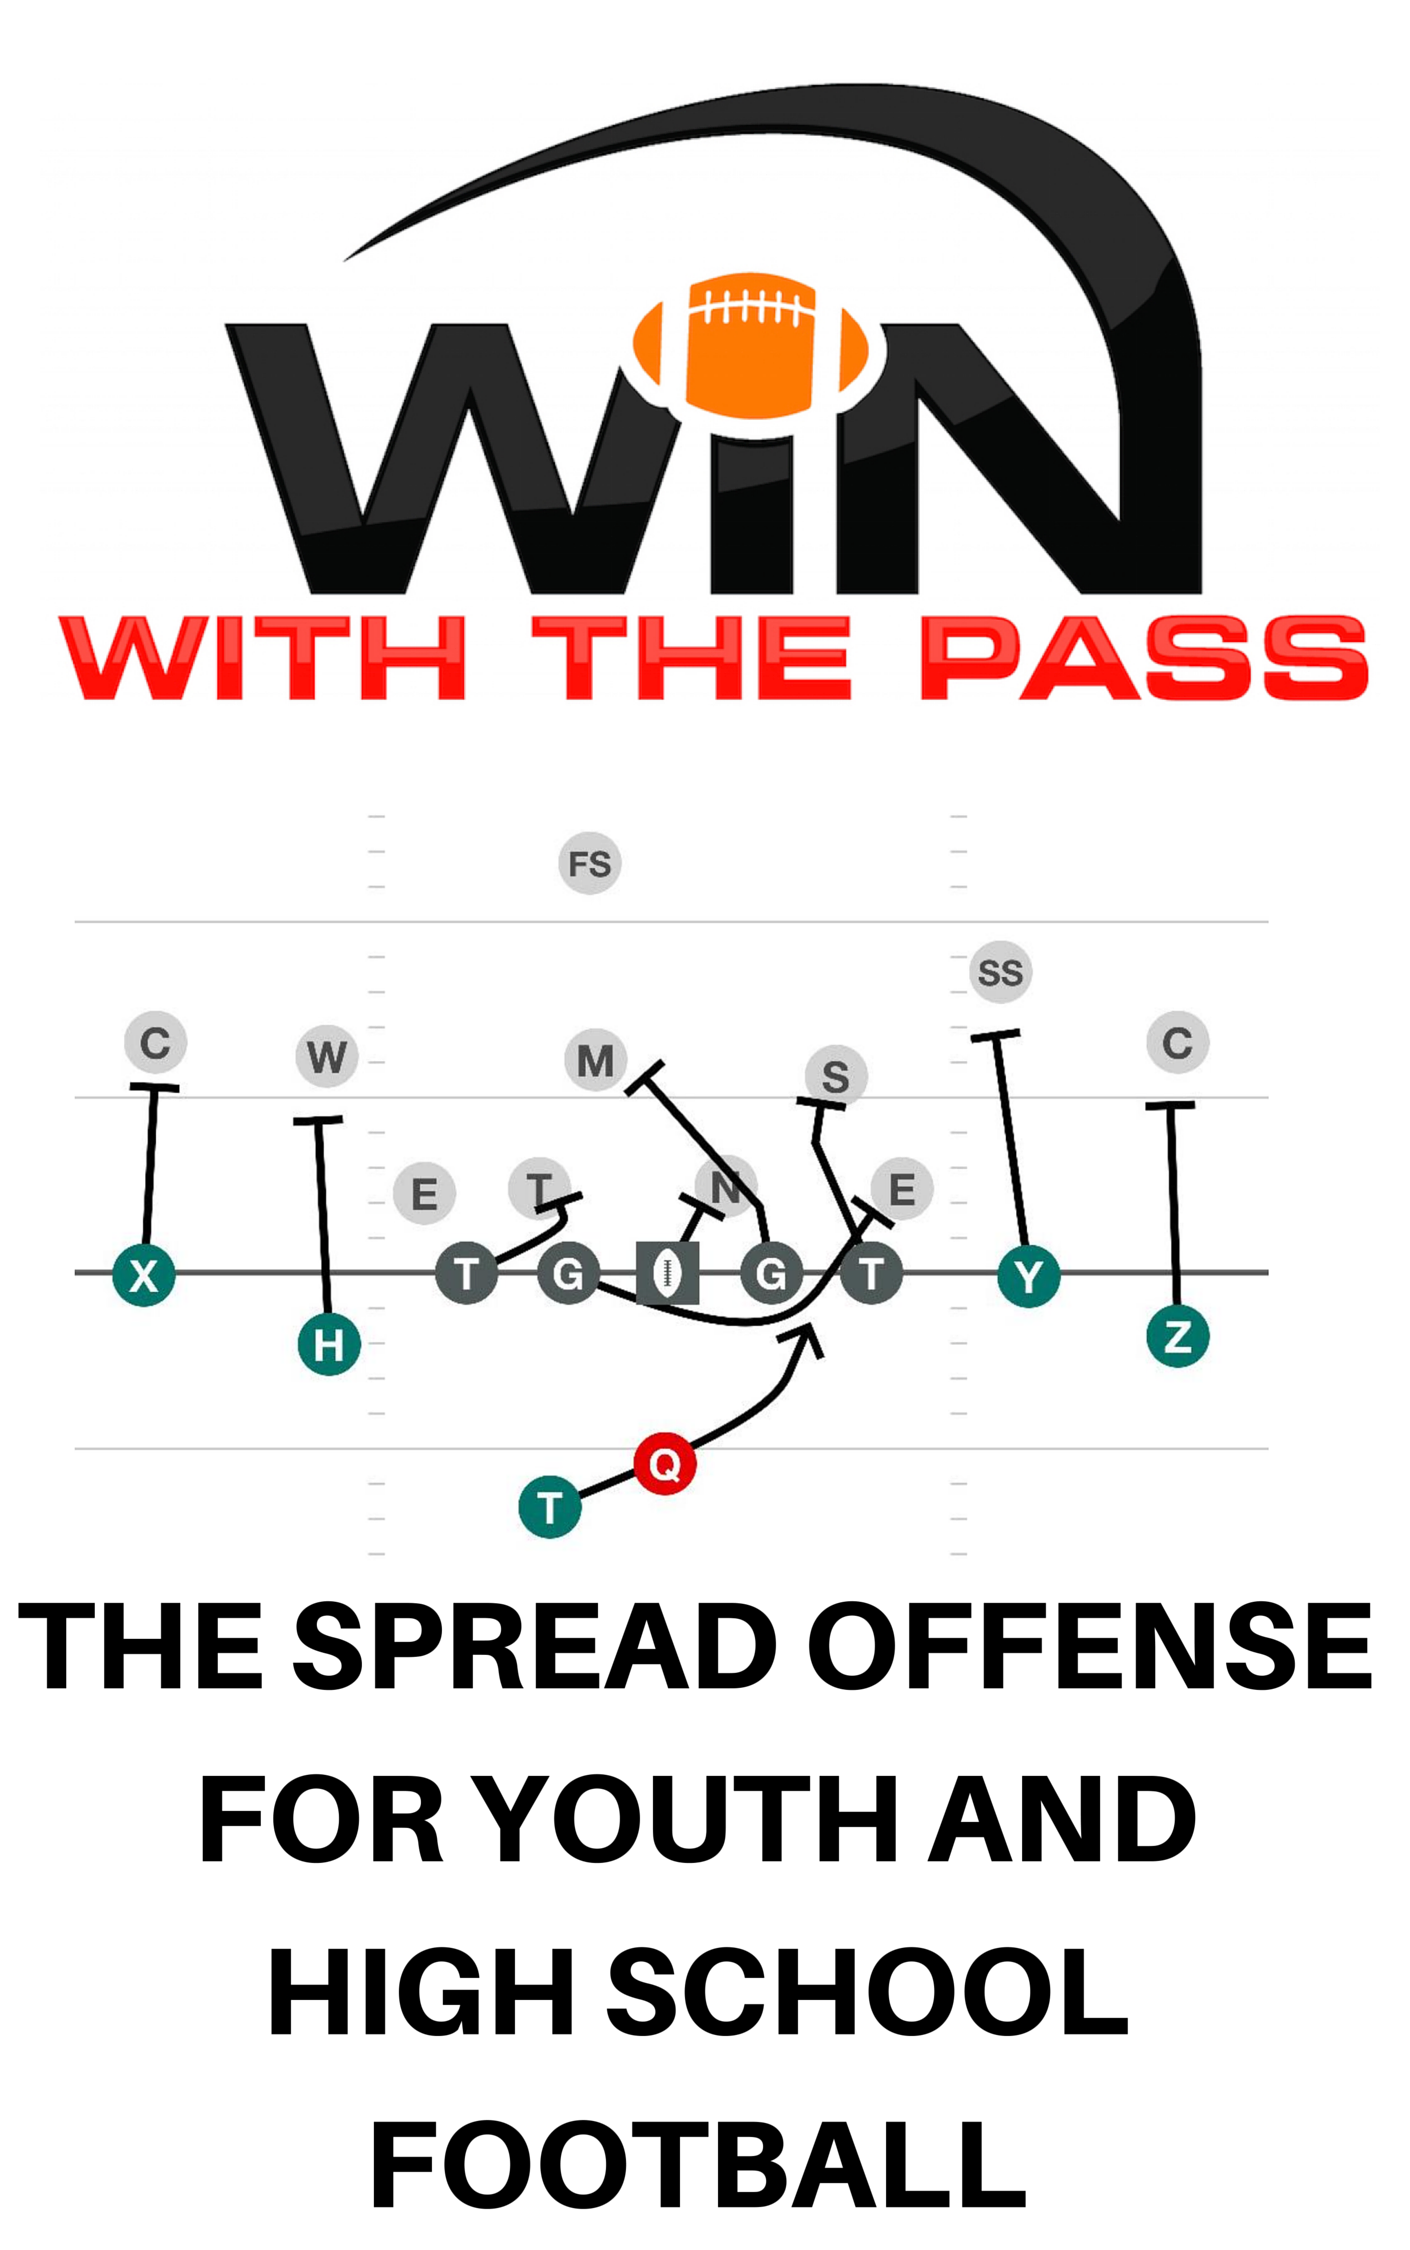 The spread Offense for youth and high school